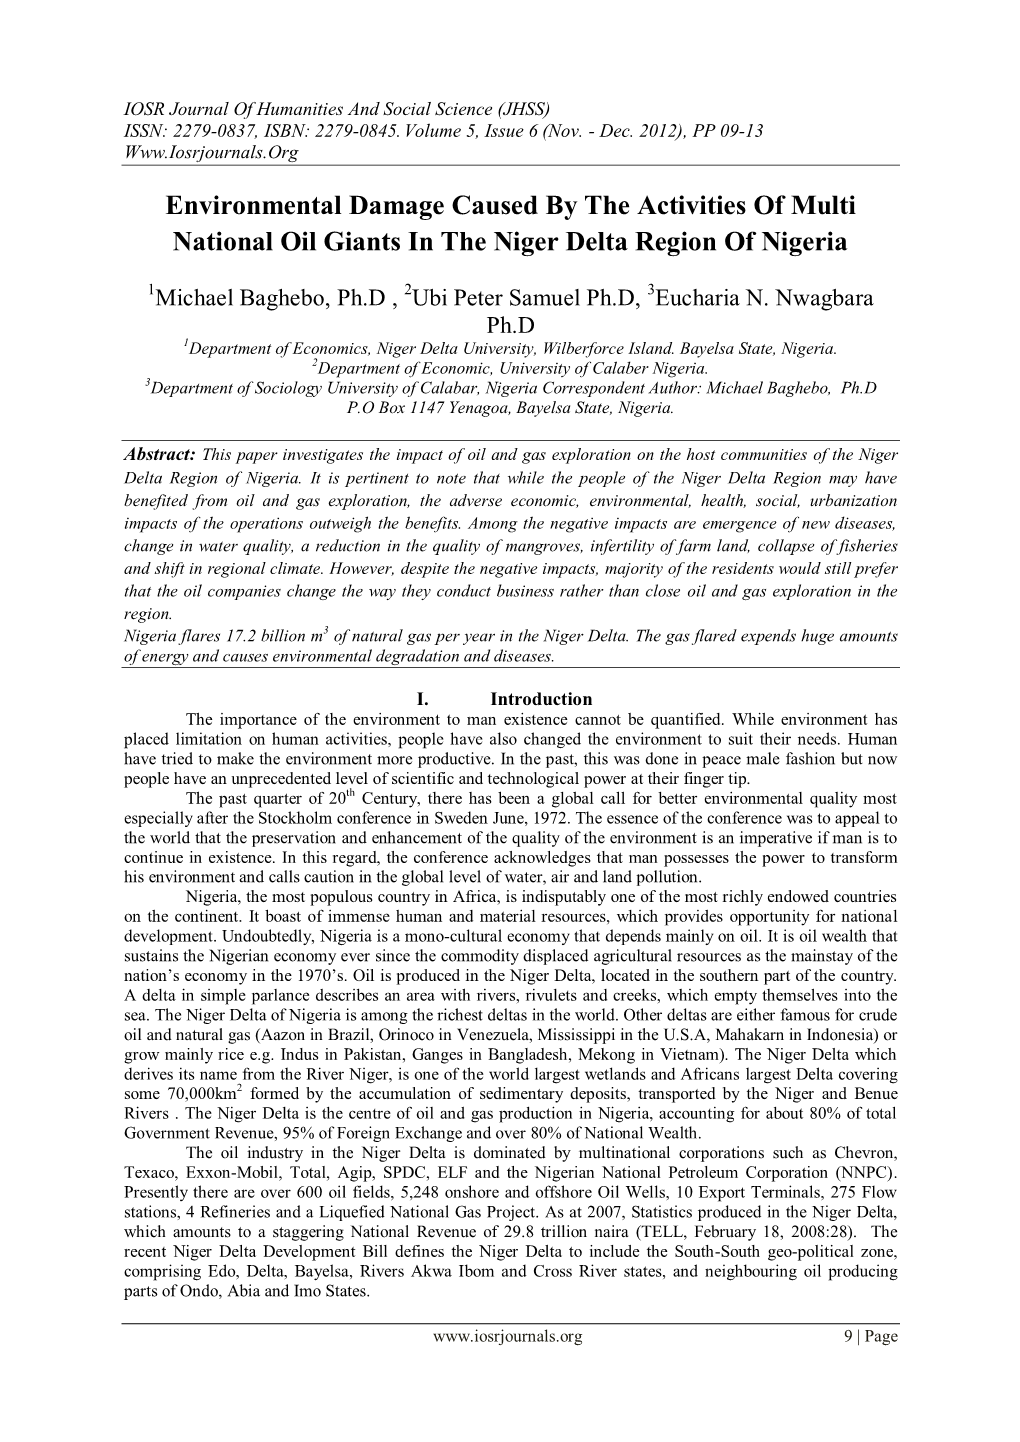 Environmental Damage Caused by the Activities of Multi National Oil Giants in the Niger Delta Region of Nigeria